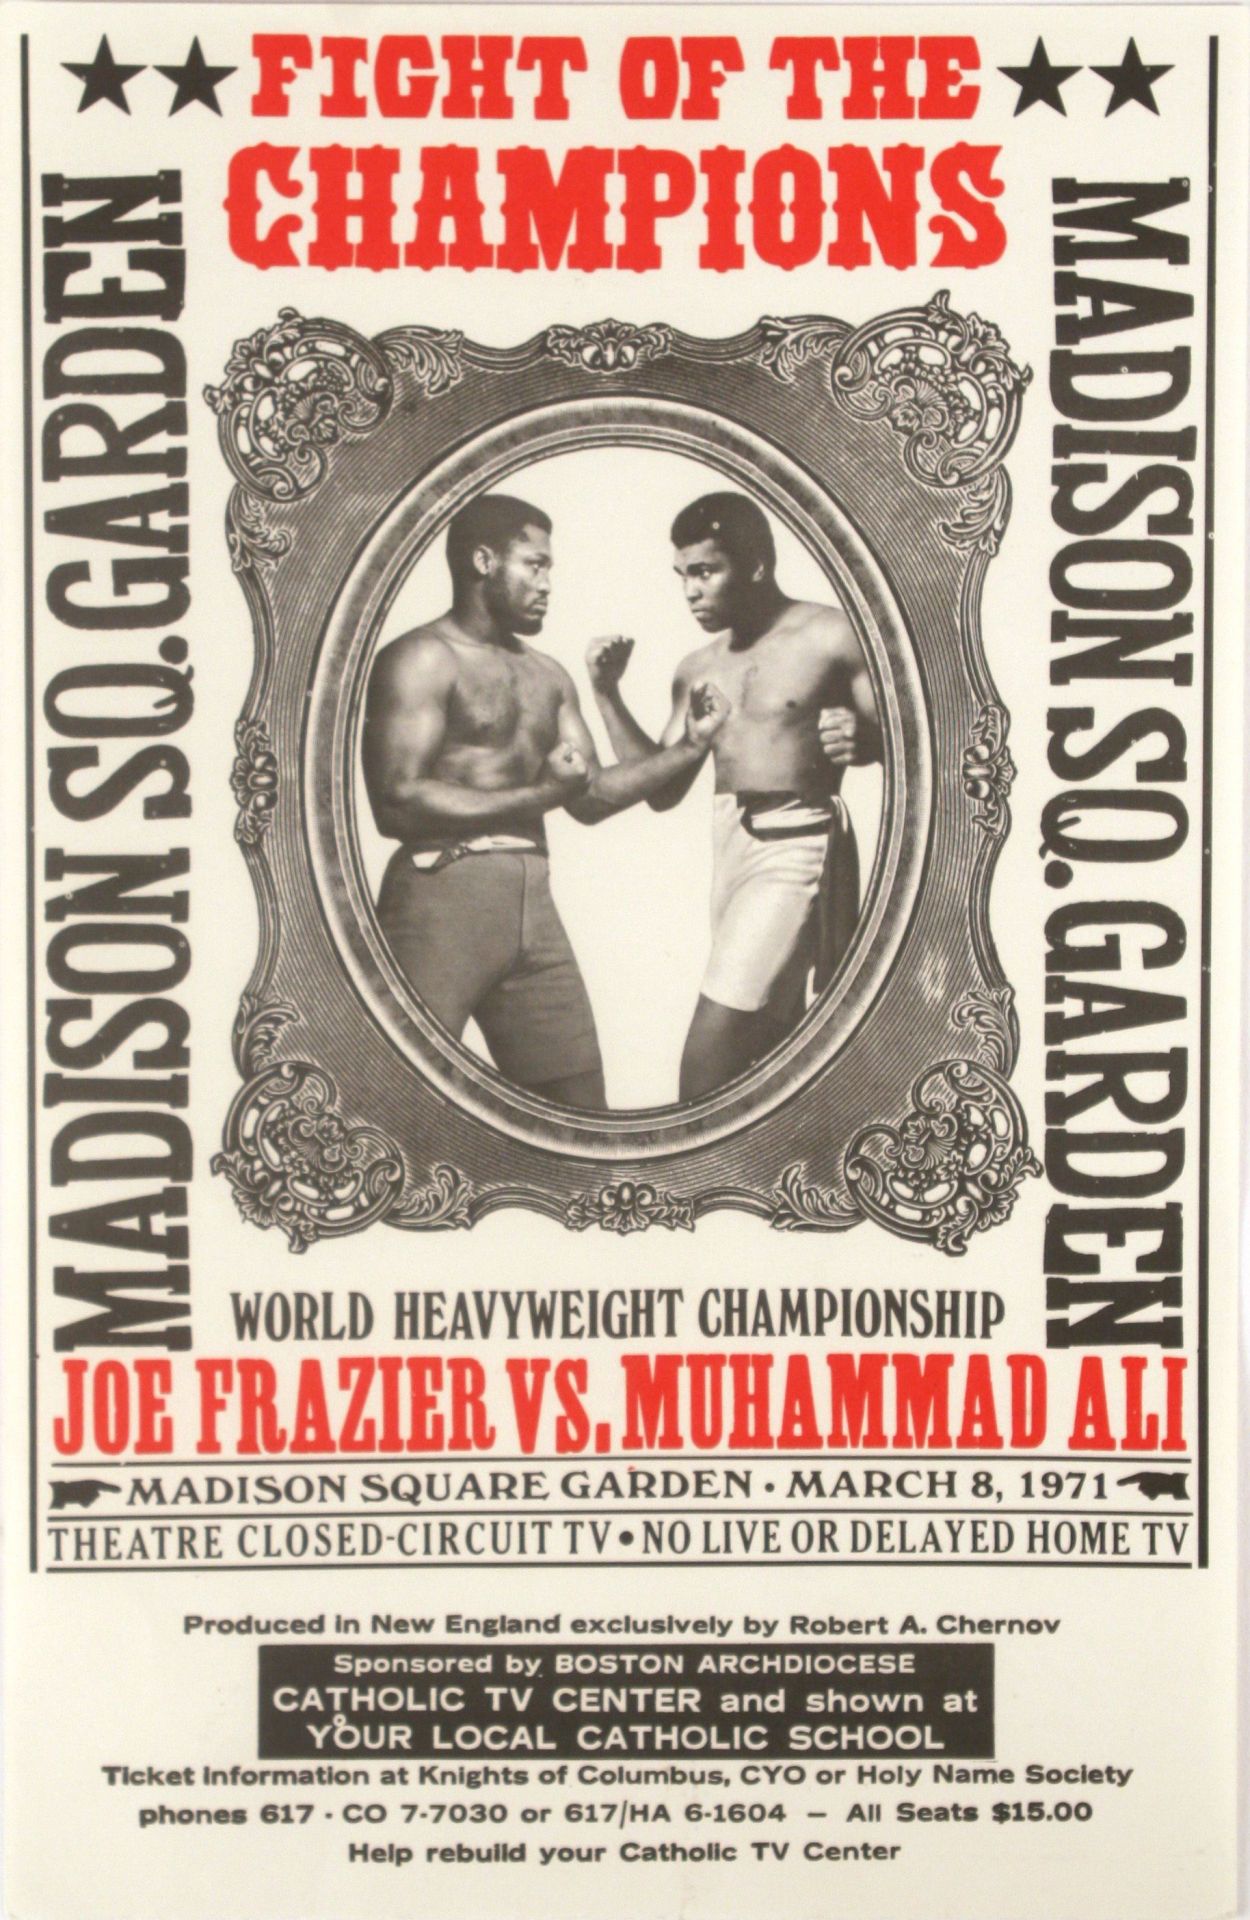 BACK IN THE DAY |3/8/71|  Joe Frazier defeated Muhammad Ali in 15 rounds by unanimous